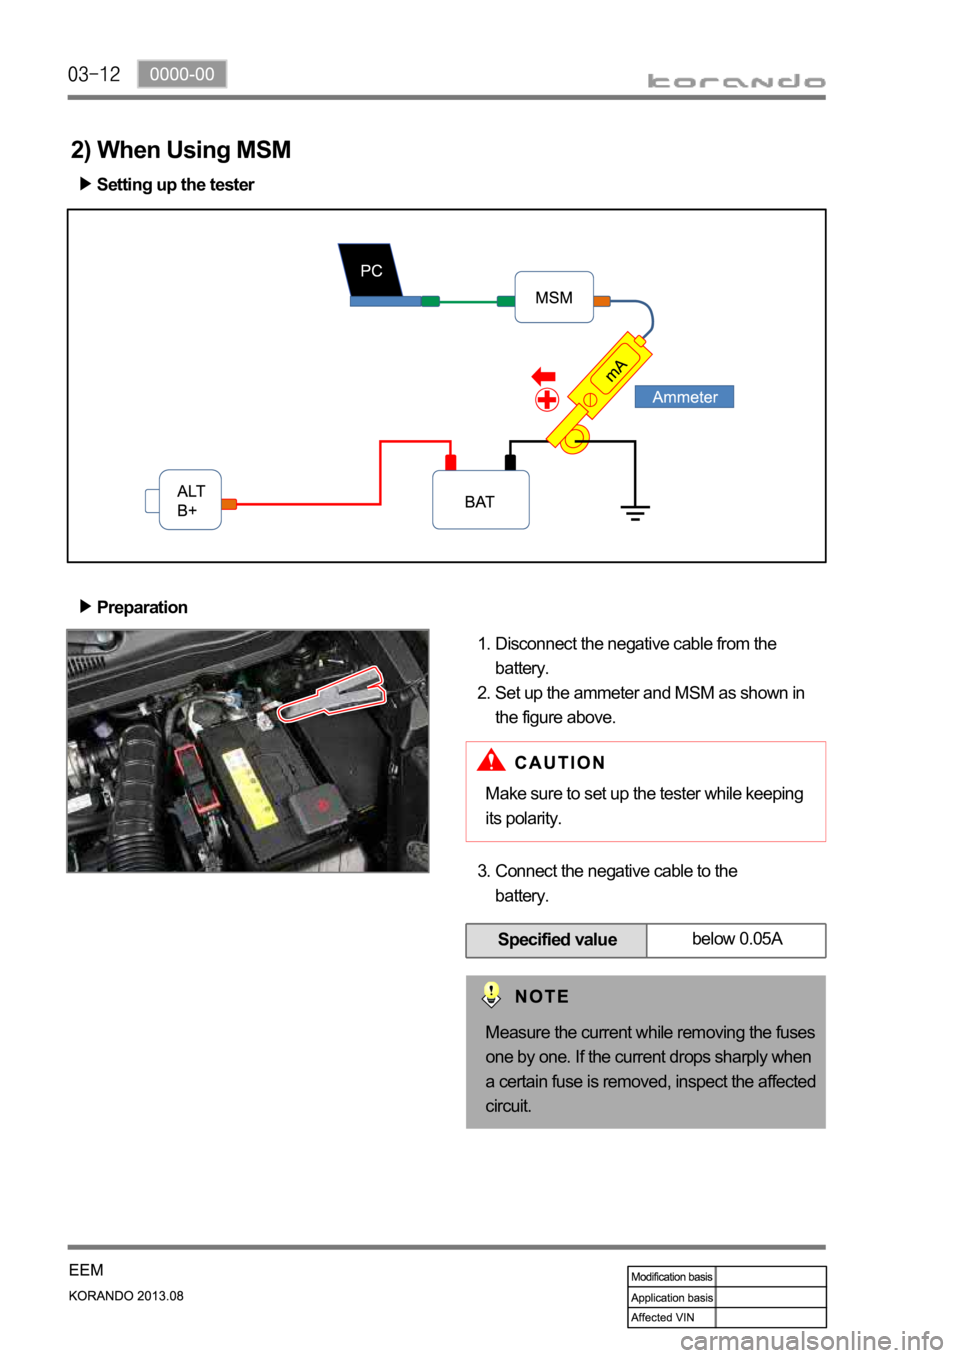 SSANGYONG KORANDO 2013  Service Manual Specified valuebelow 0.05A
Setting up the tester
Preparation
Disconnect the negative cable from the 
battery.
Set up the ammeter and MSM as shown in 
the figure above. 1.
2.
2) When Using MSM
Connect 